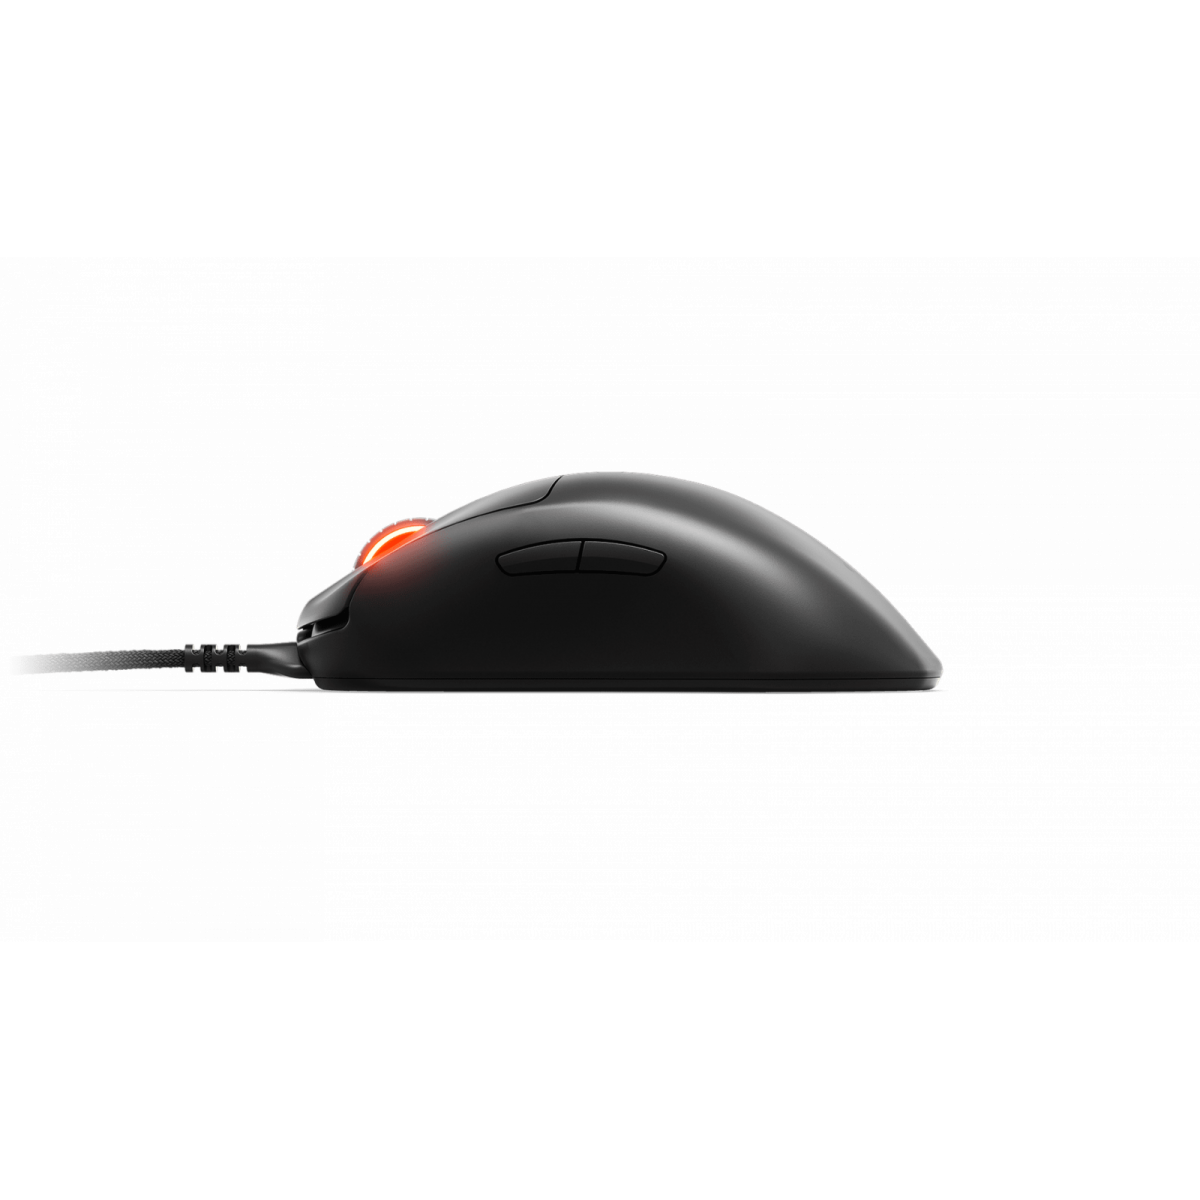 Chuột SteelSeries Prime